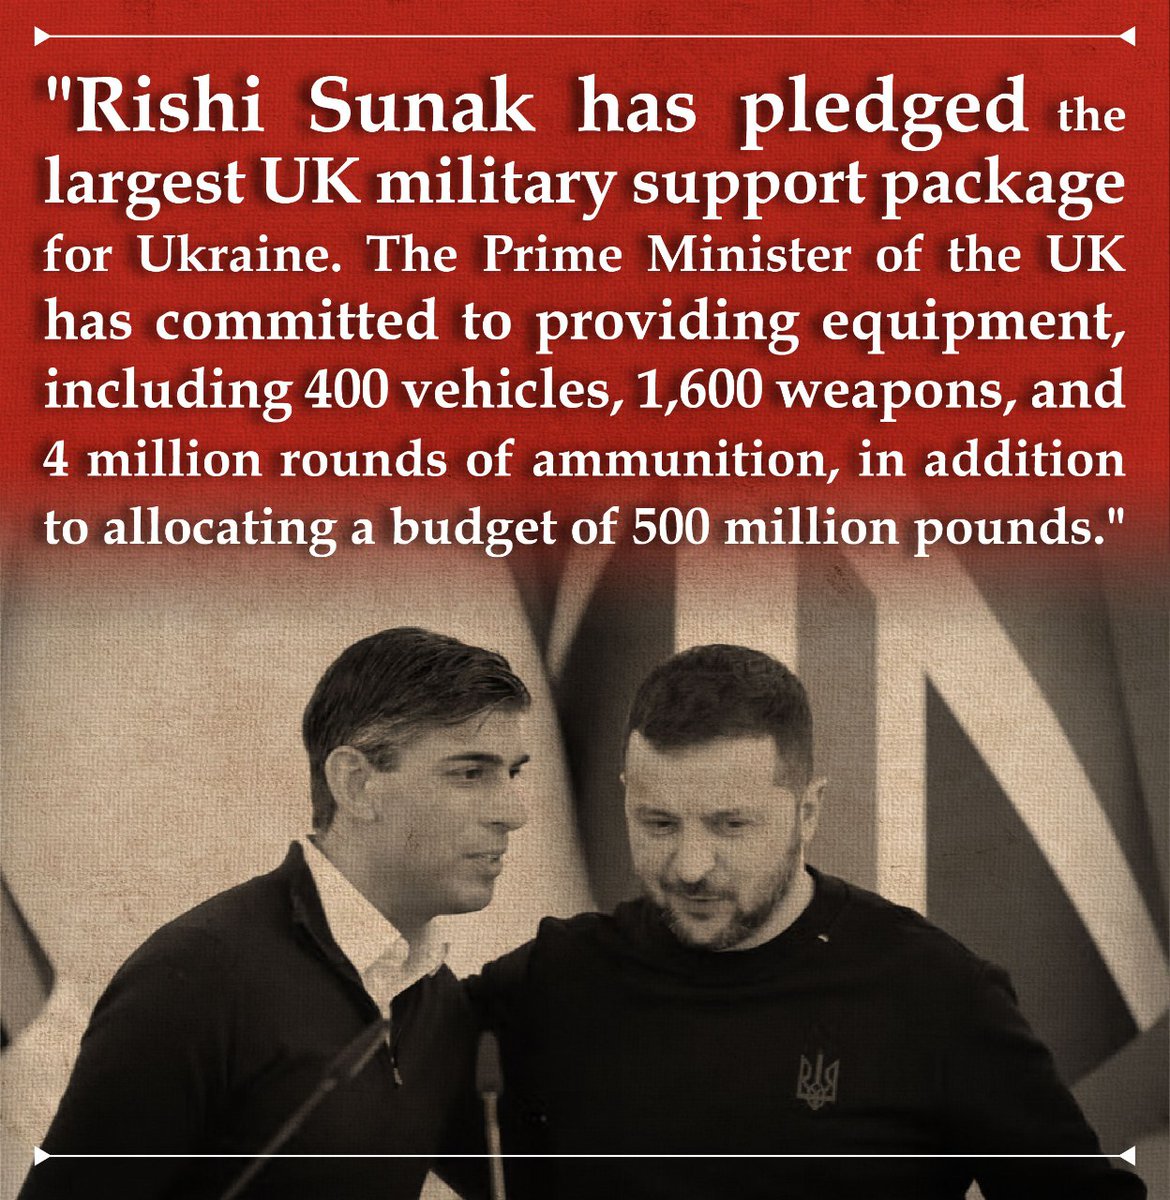 Rishi Sunak has pledged Britain's biggest military support package for Ukraine. The British Prime Minister has pledged to provide equipment including 400 vehicles, 1,600 weapons and 4 million bullets,in addition to allocating a budget of 500 million pounds. #scottishindependence